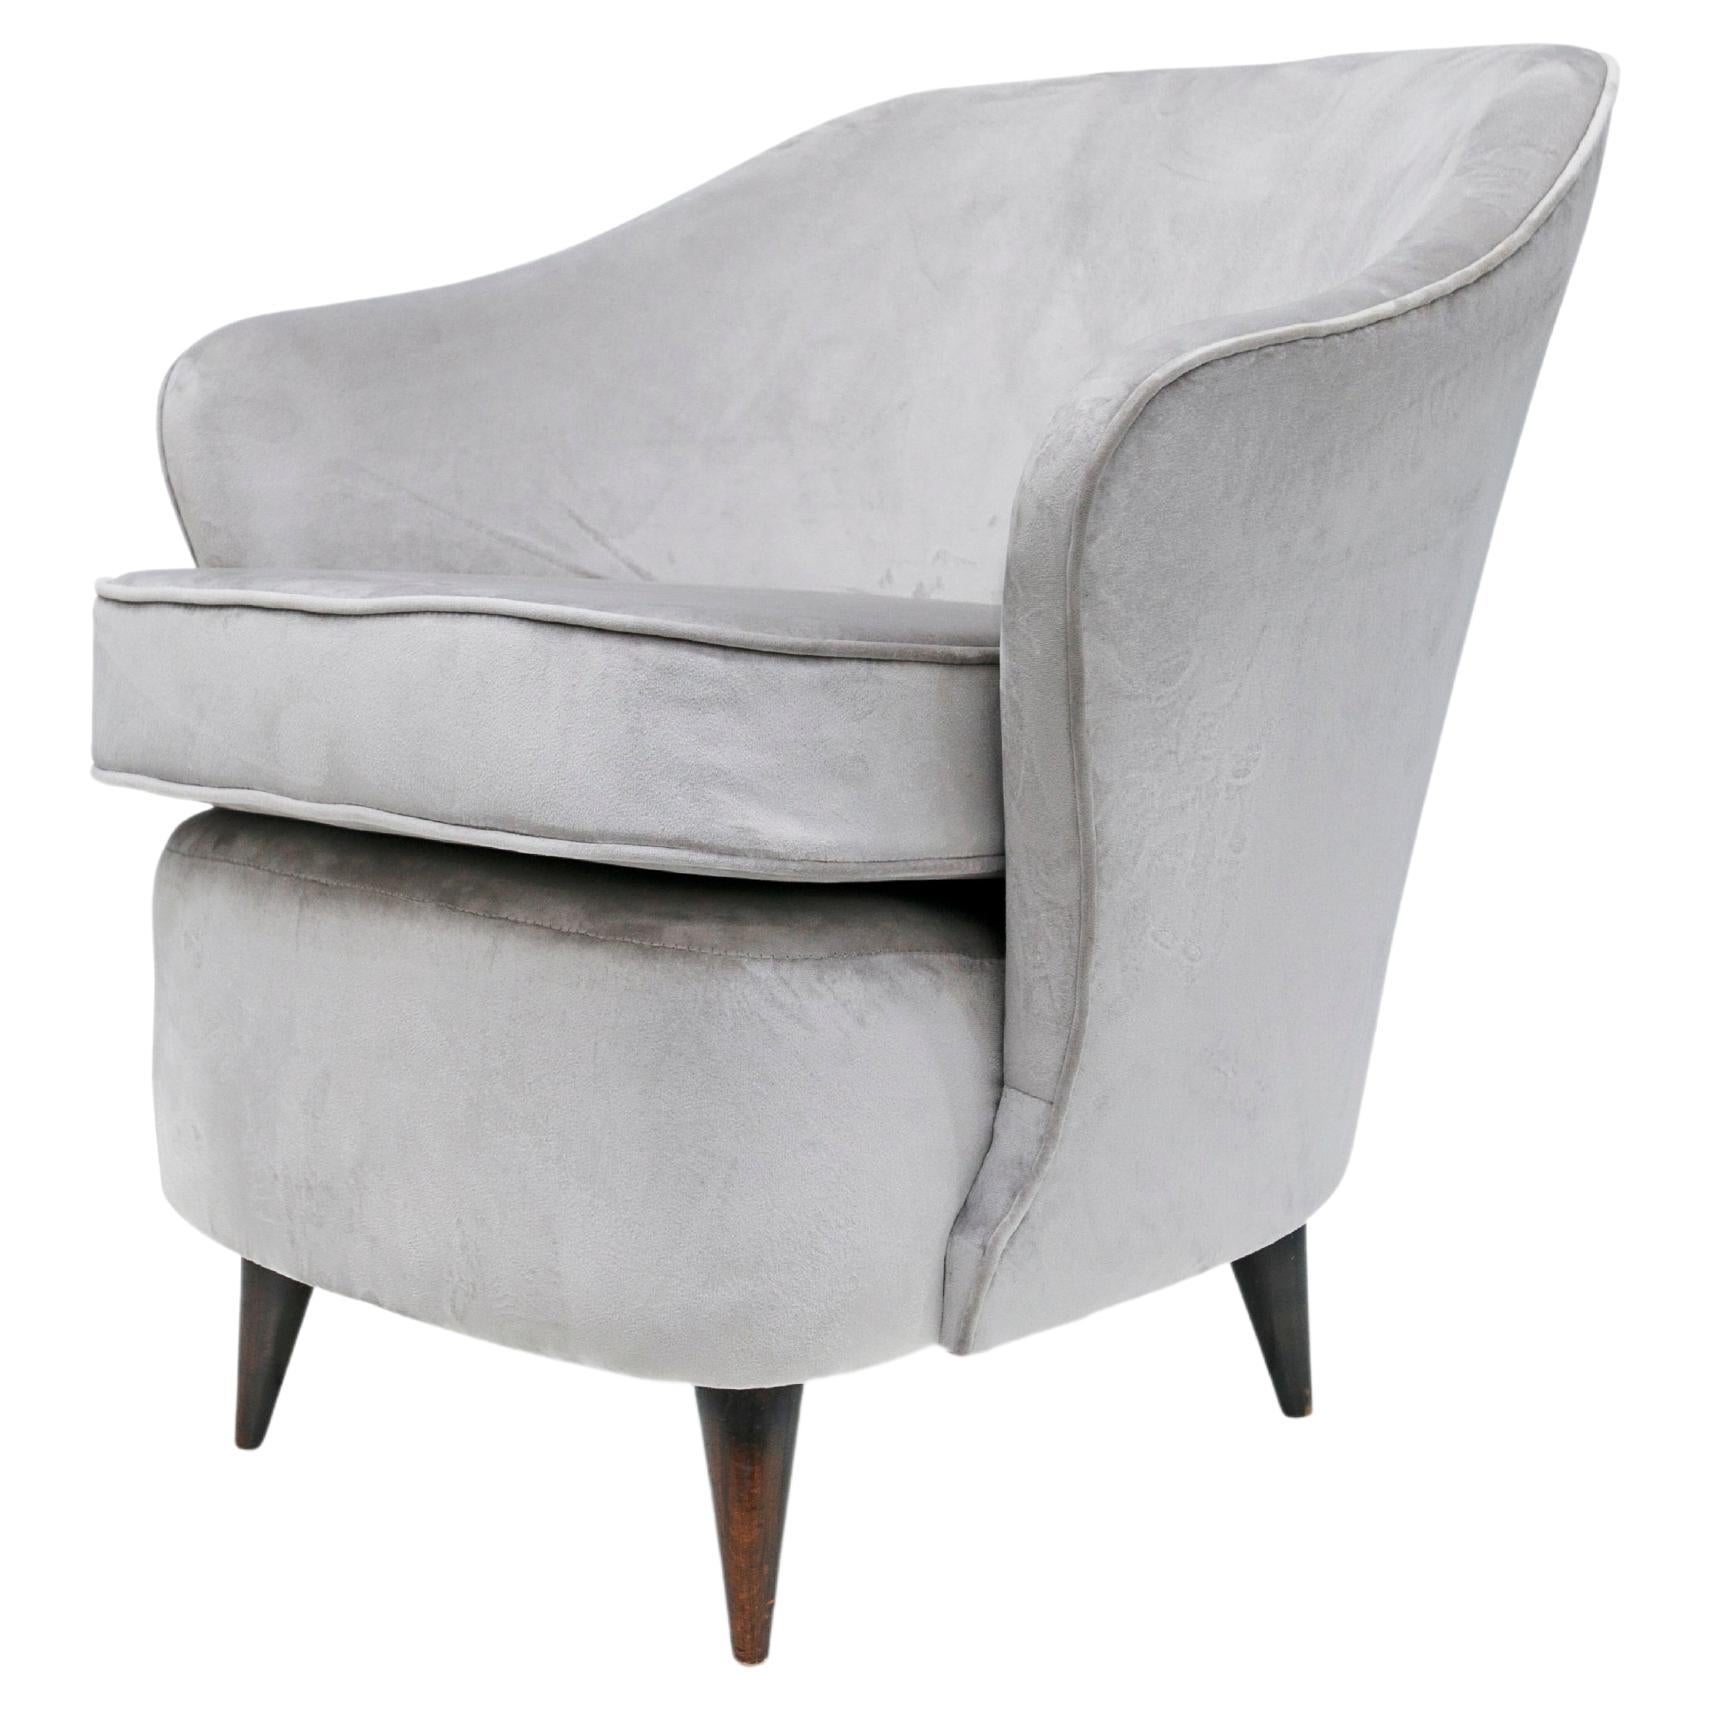 Thick Armchair in Grey Fabric Attributed to Joaquim Tenreiro, c. 1950s For Sale